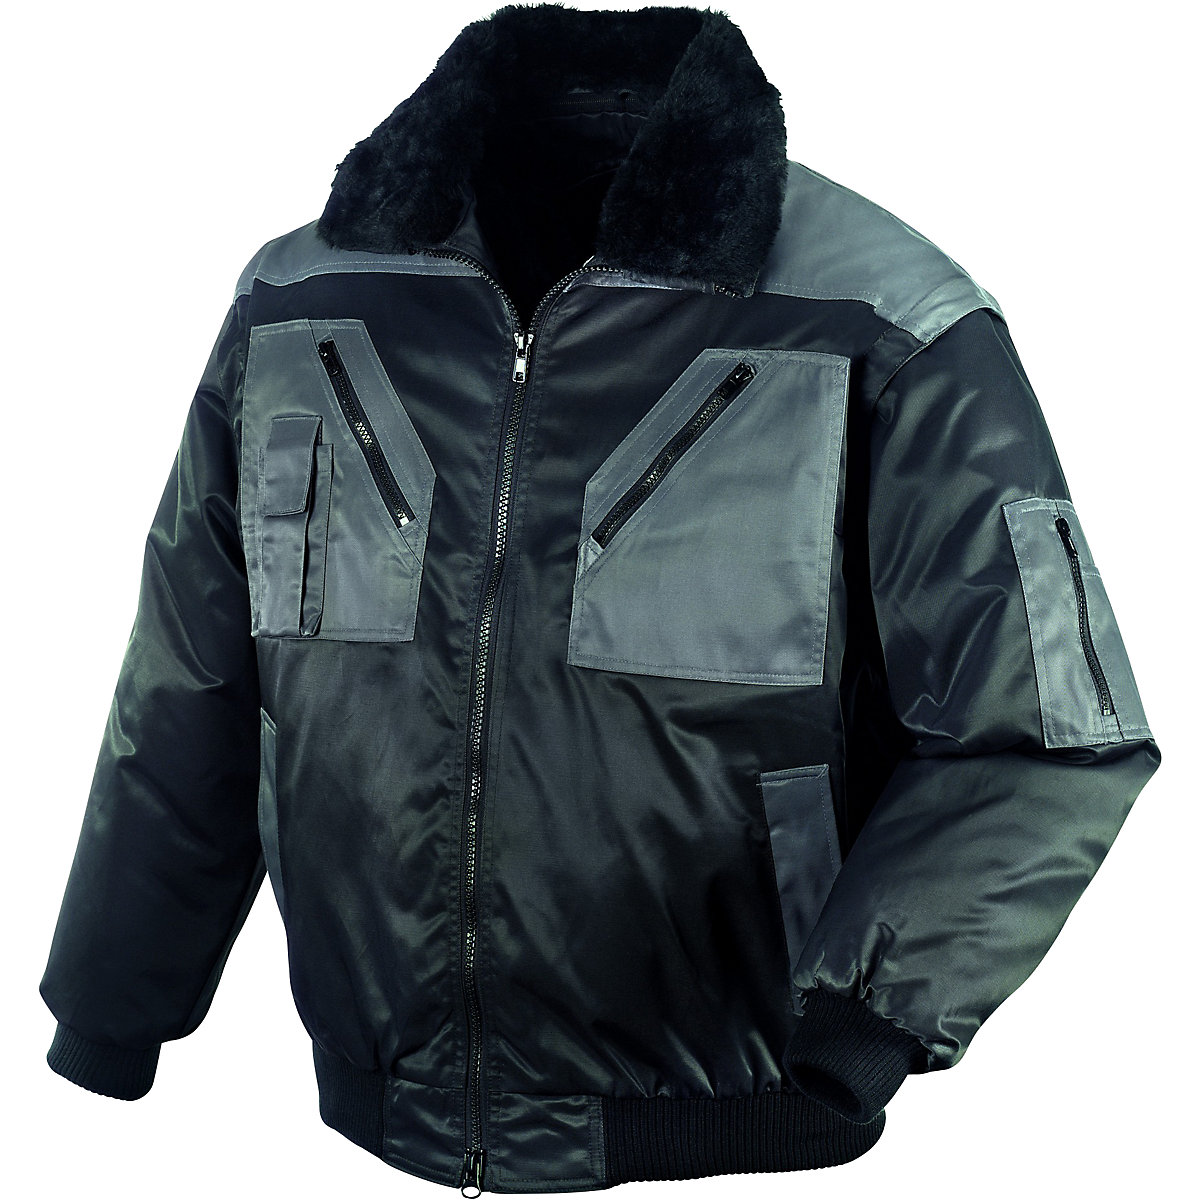 Pilot jacket with removable inner fur